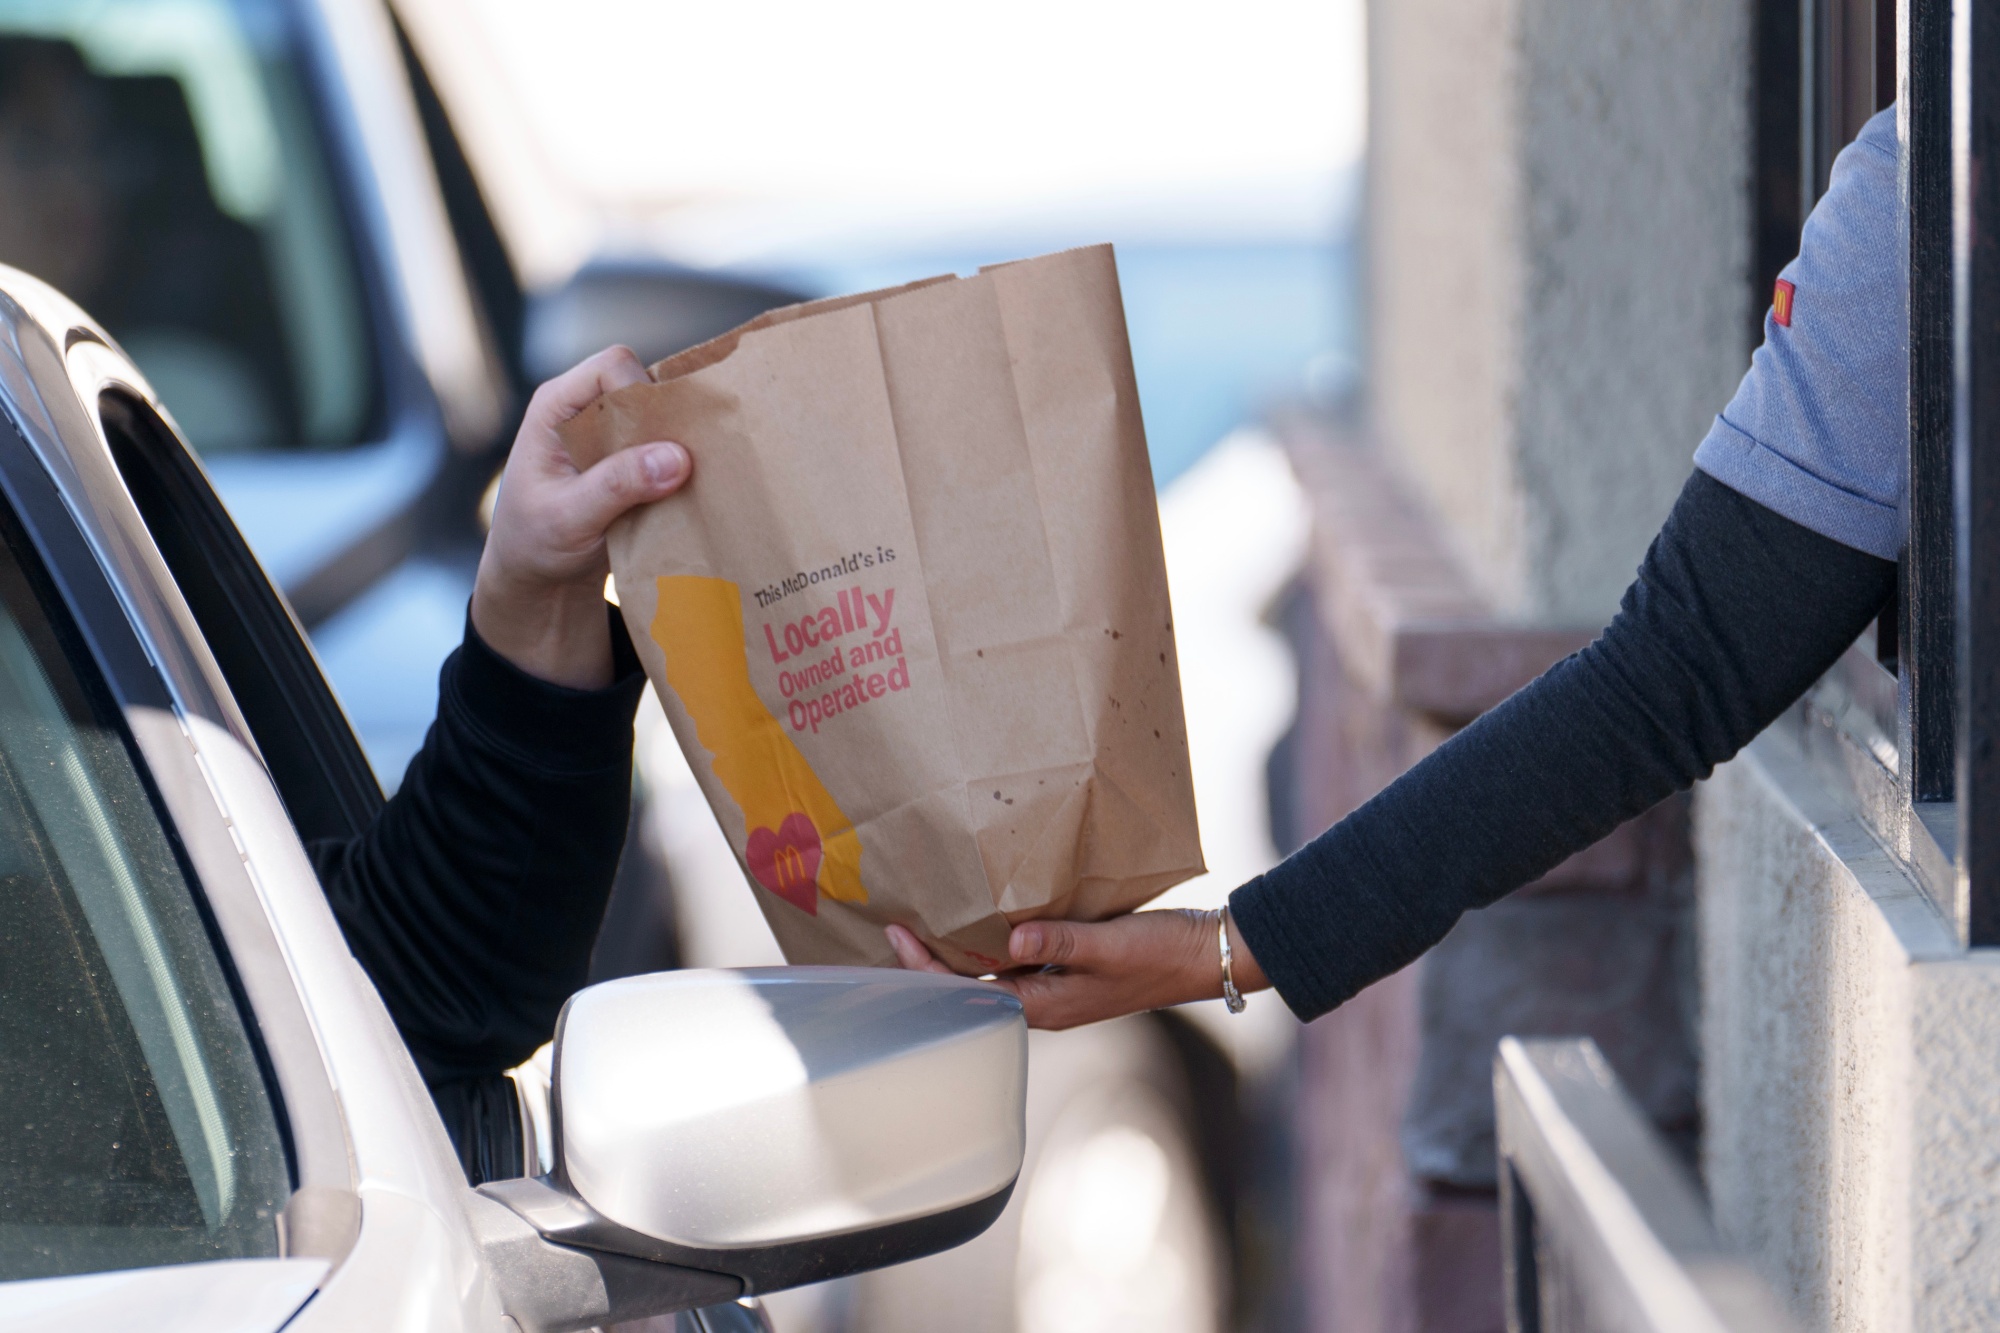 An employee hands a bag to a customer at the drive-thru of a McDonald’s restaurant in Los Angeles on April 1, following California’s wage hike.